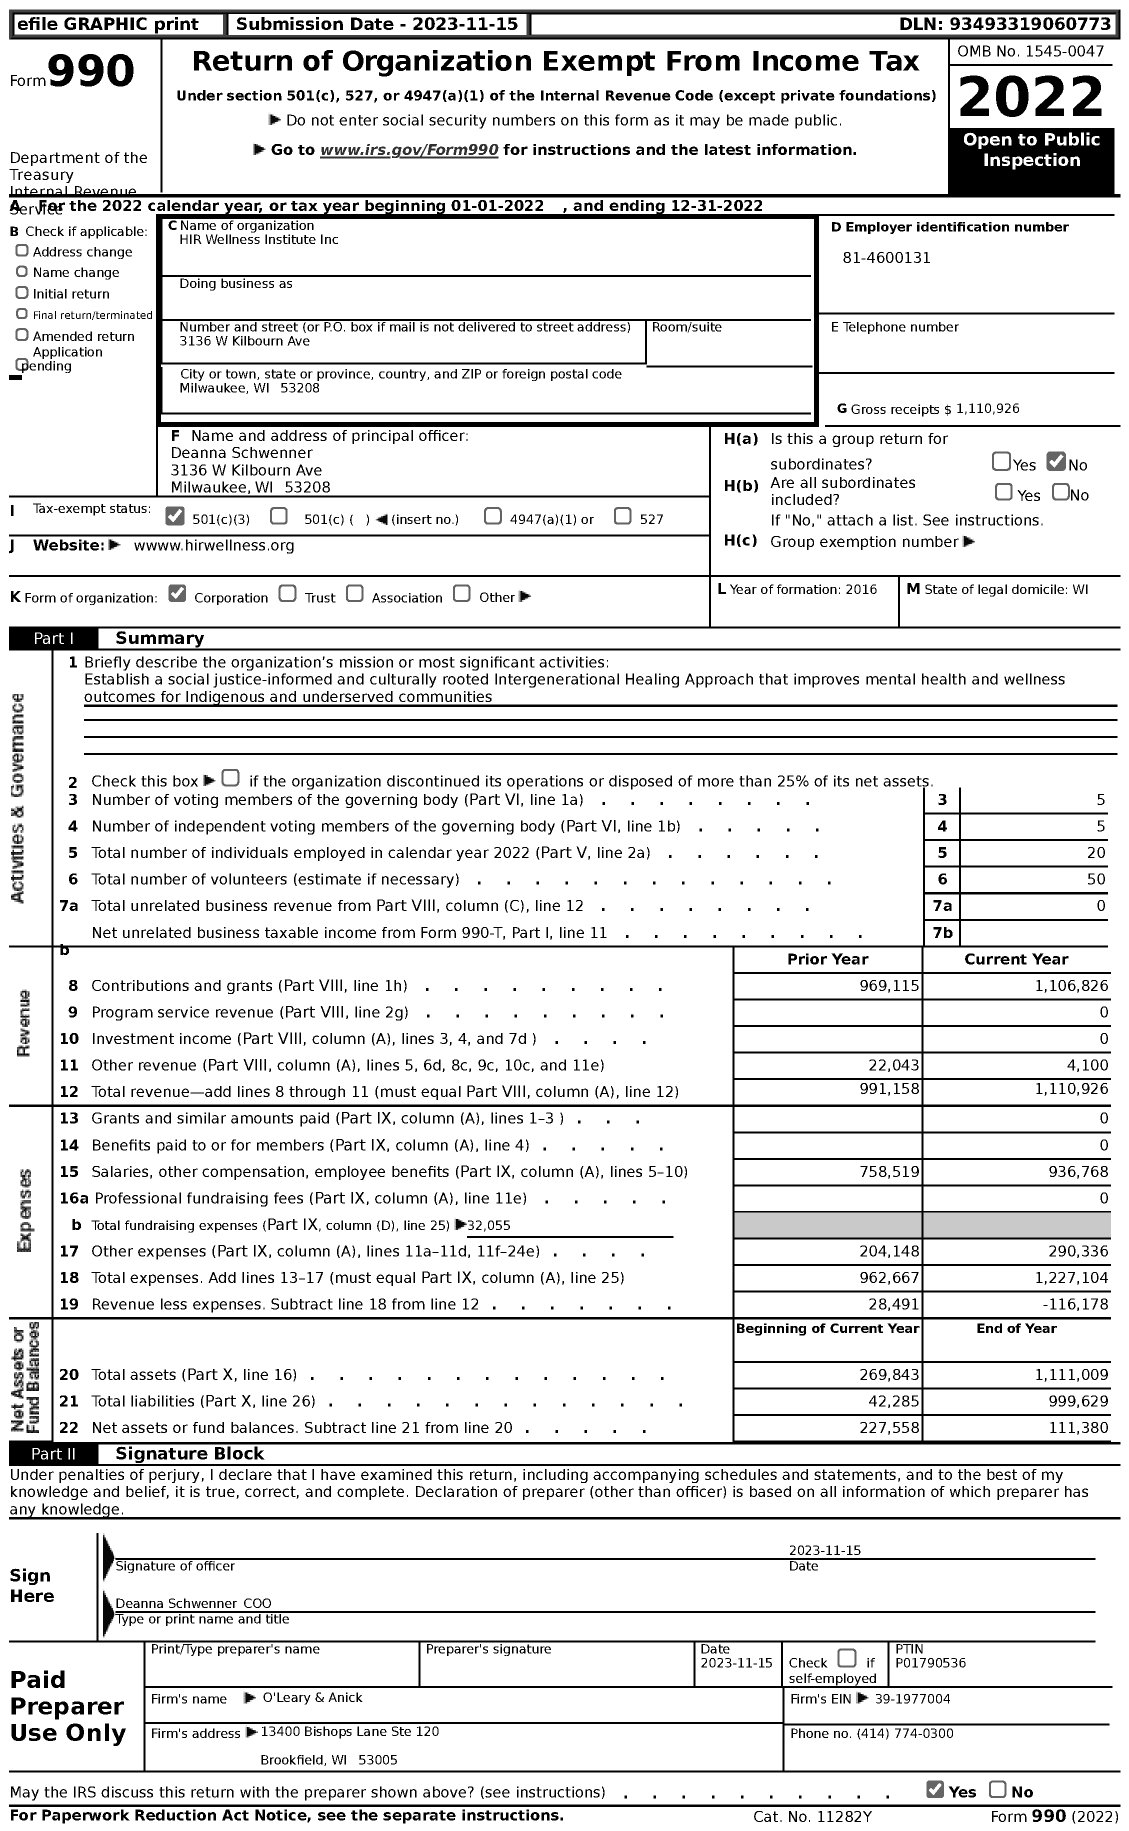 Image of first page of 2022 Form 990 for HIR Wellness Institute